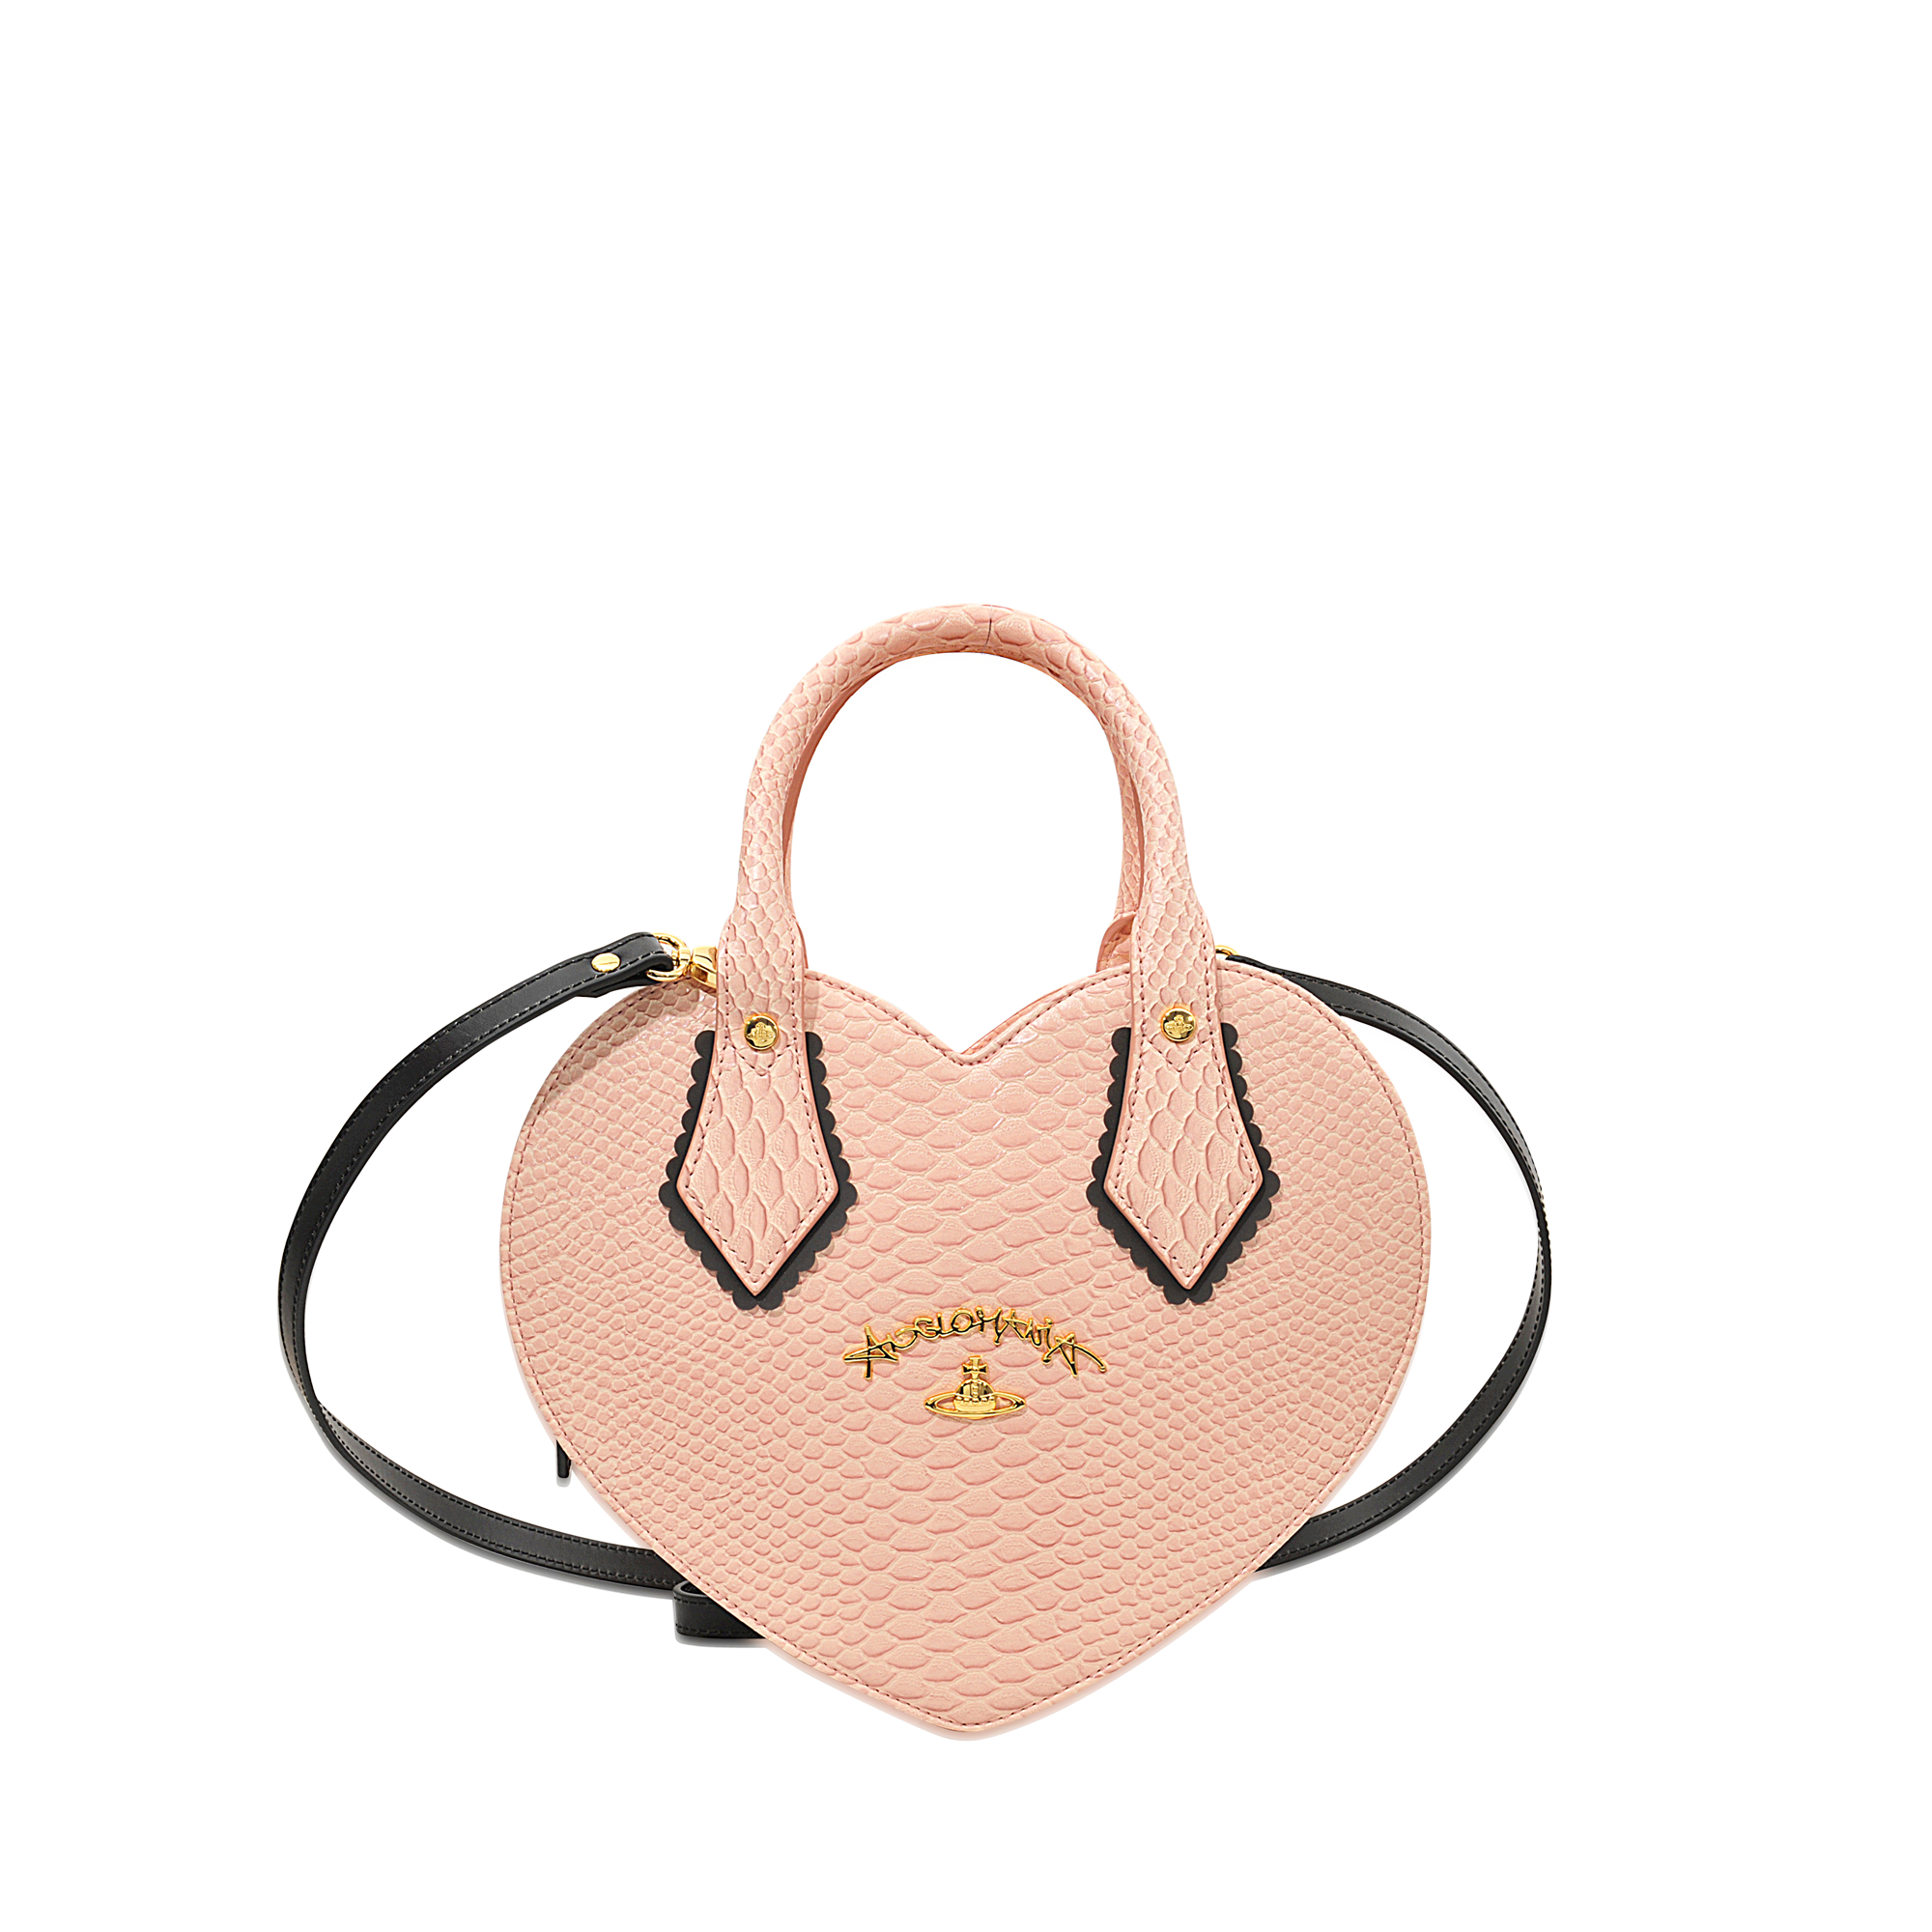 Vivienne Westwood Leather Frilly Snake Heart Bag in Pink - Lyst